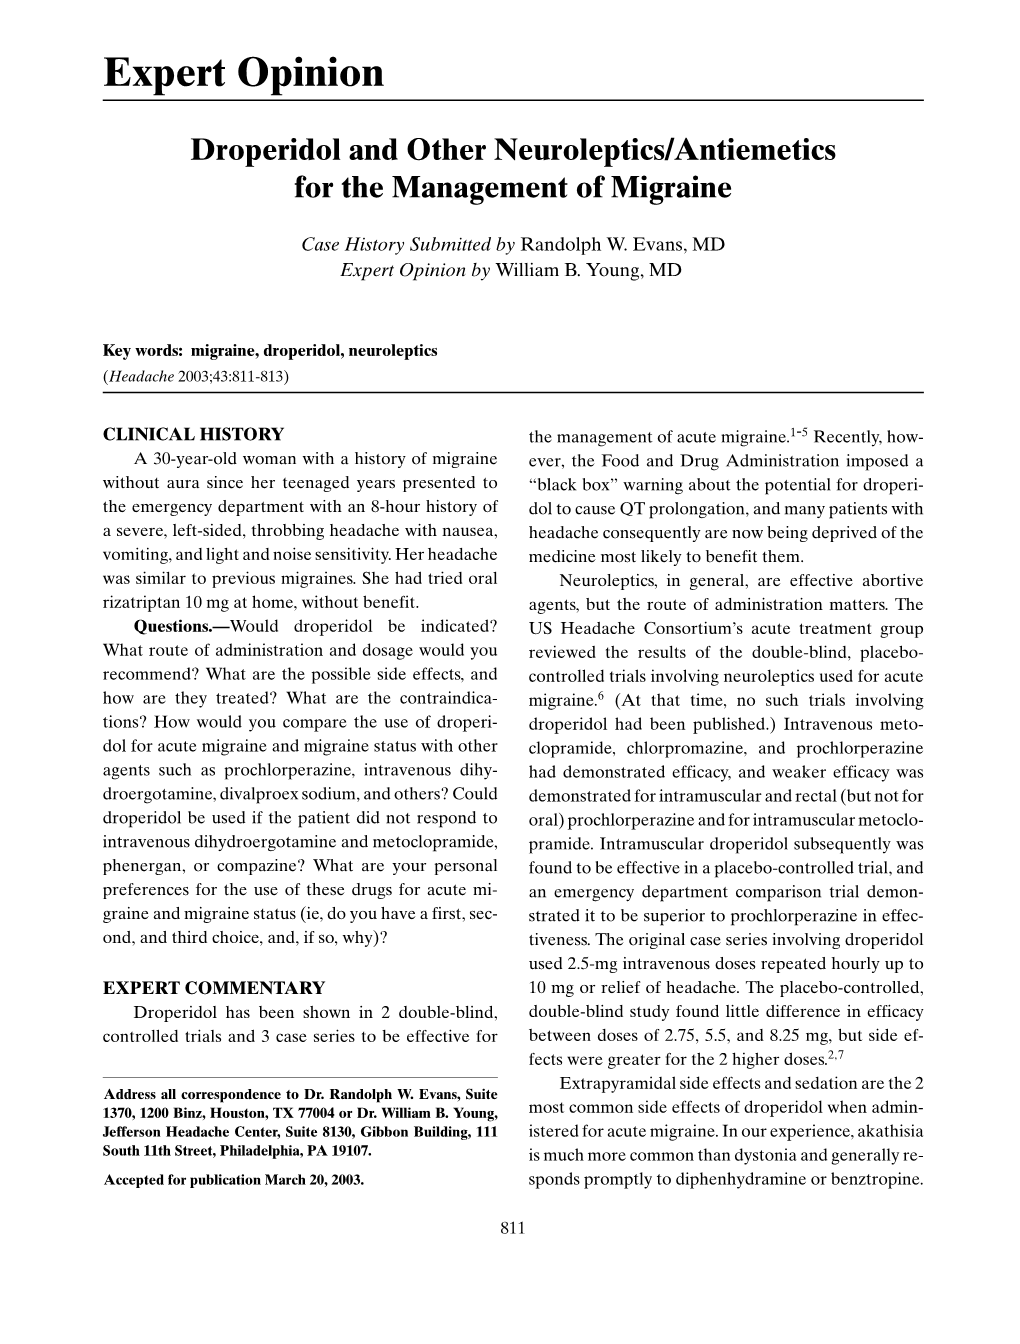 Droperidol and Other Neuroleptics/Antiemetics for the Management of Migraine